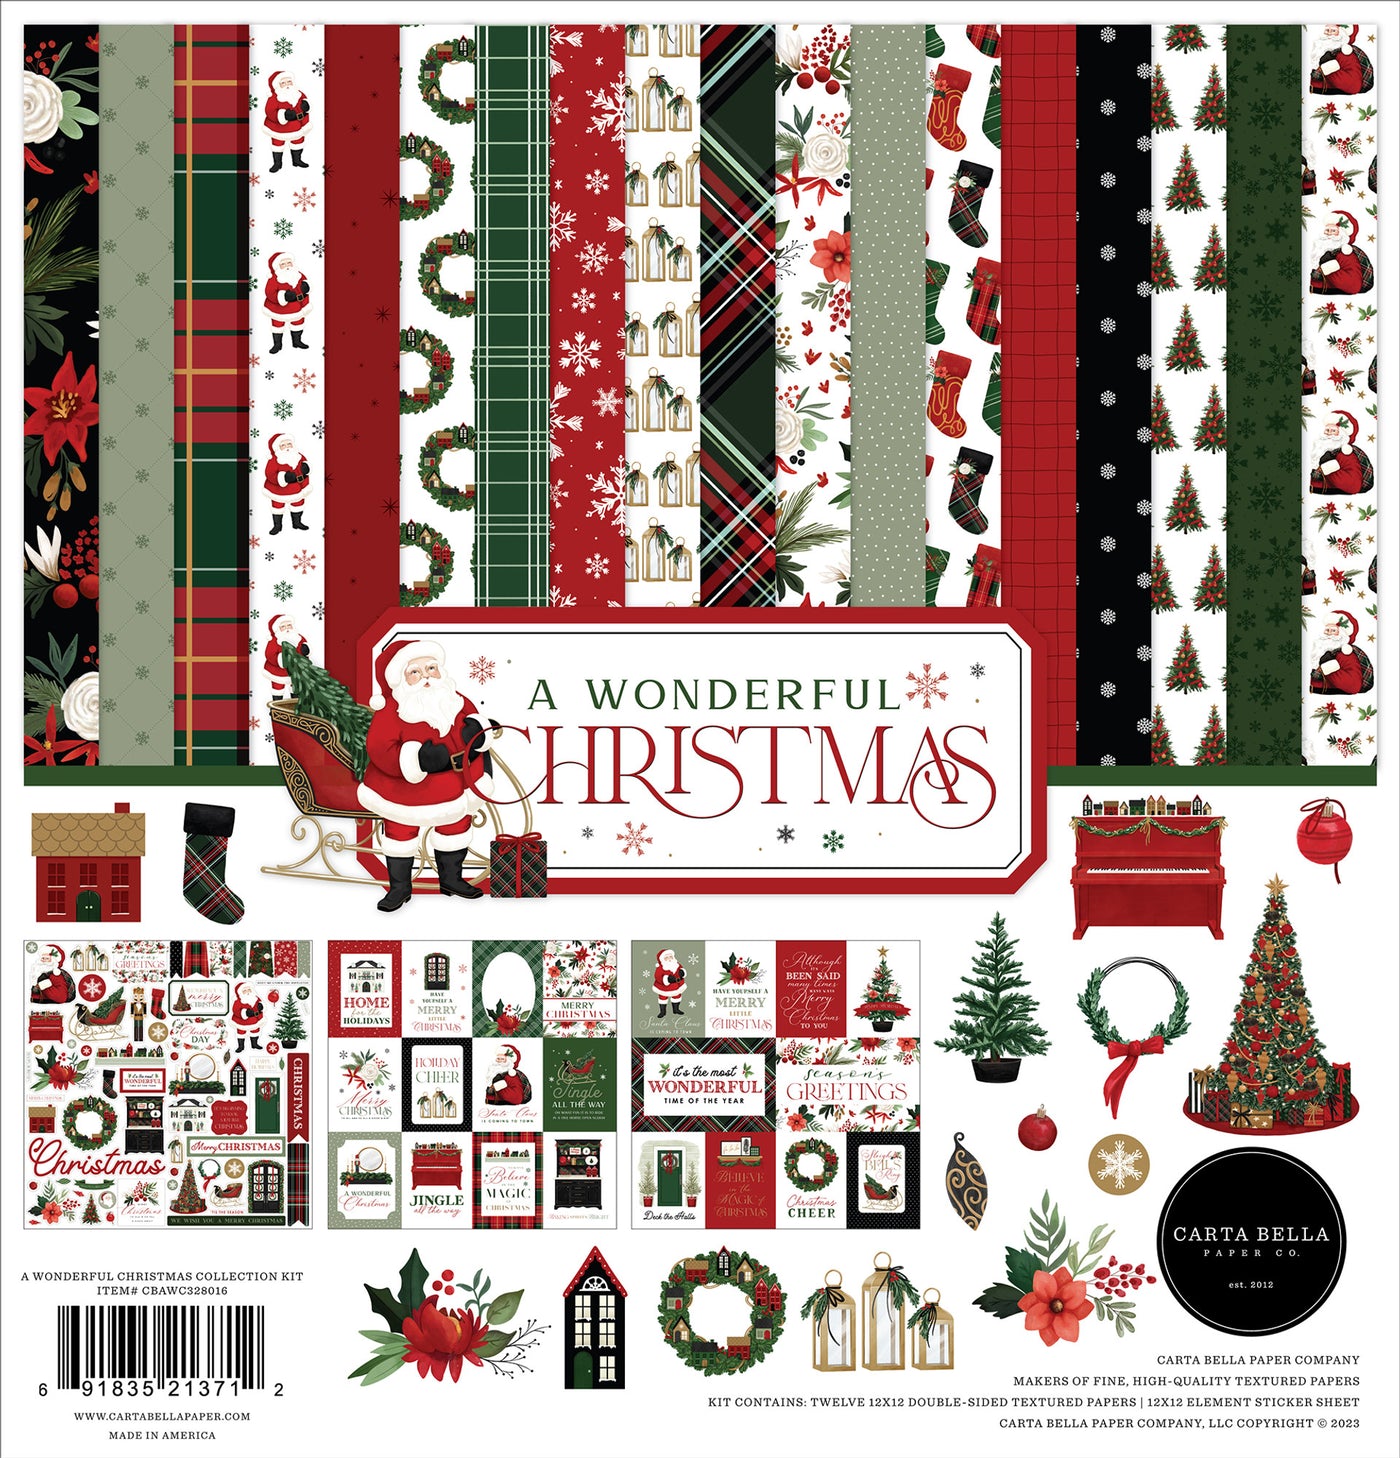 Collection Kit for paper crafts includes 12 double-sided papers with all the popular symbols of Christmastime. Matching sticker elements sheet included.